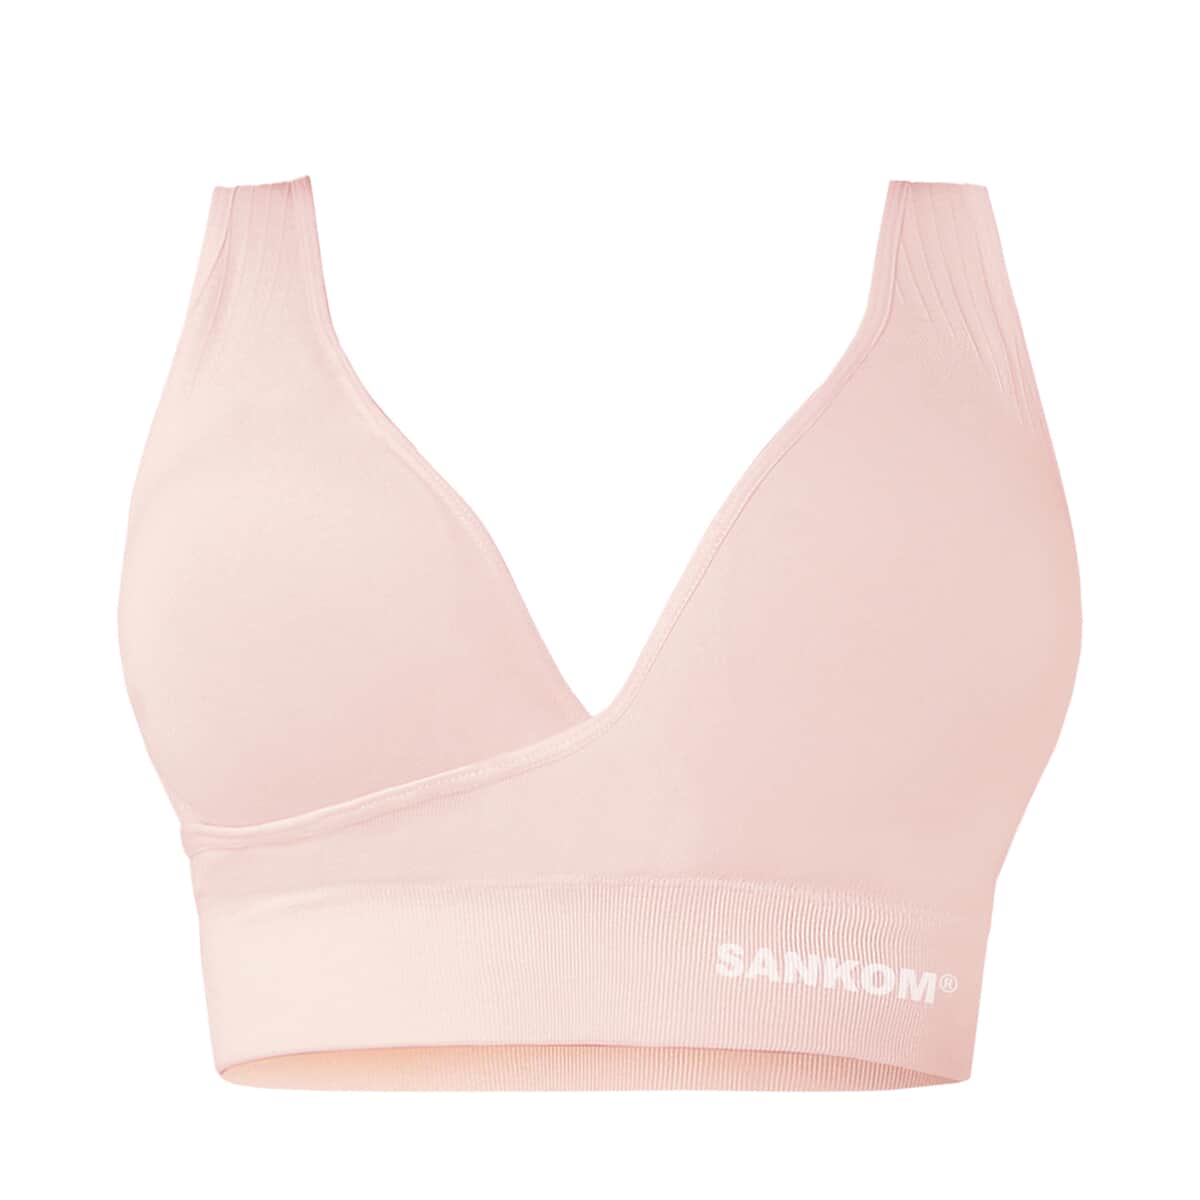 SANKOM Patent Classic Shaping Camisole Bra Sports Back Support